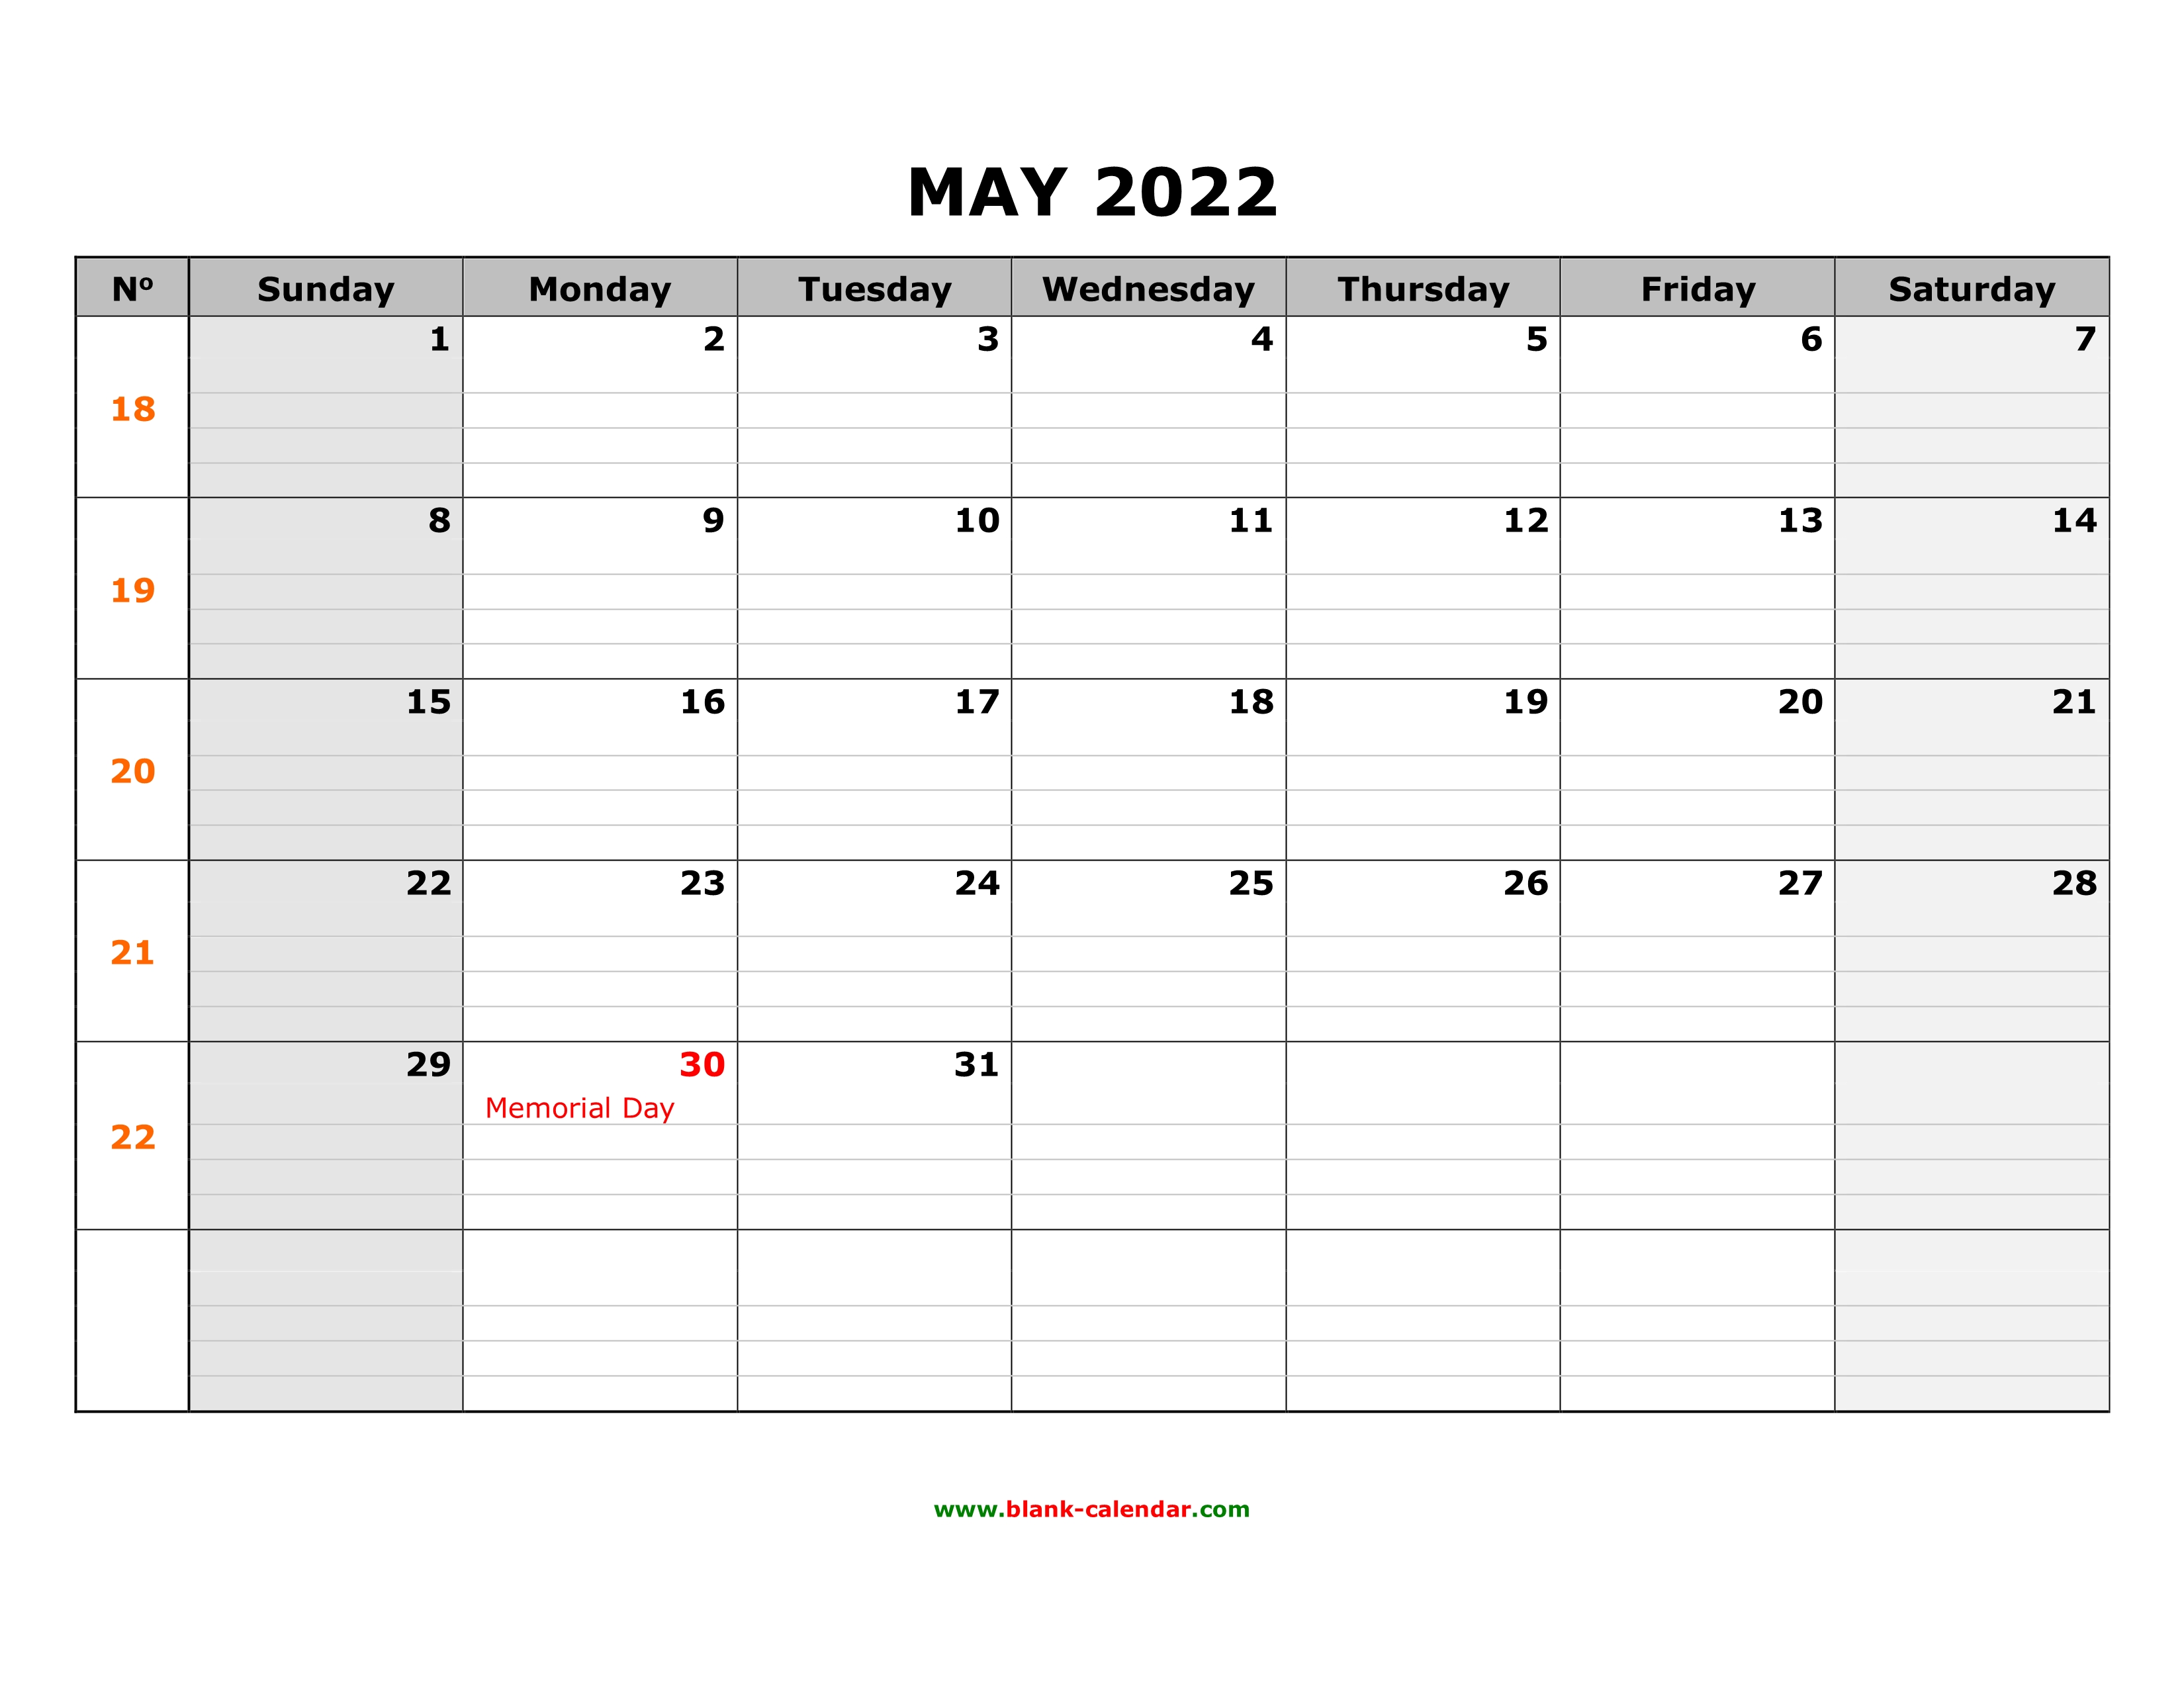 Large May 2022 Calendar Free Download Printable May 2022 Calendar, Large Box Grid, Space For Notes